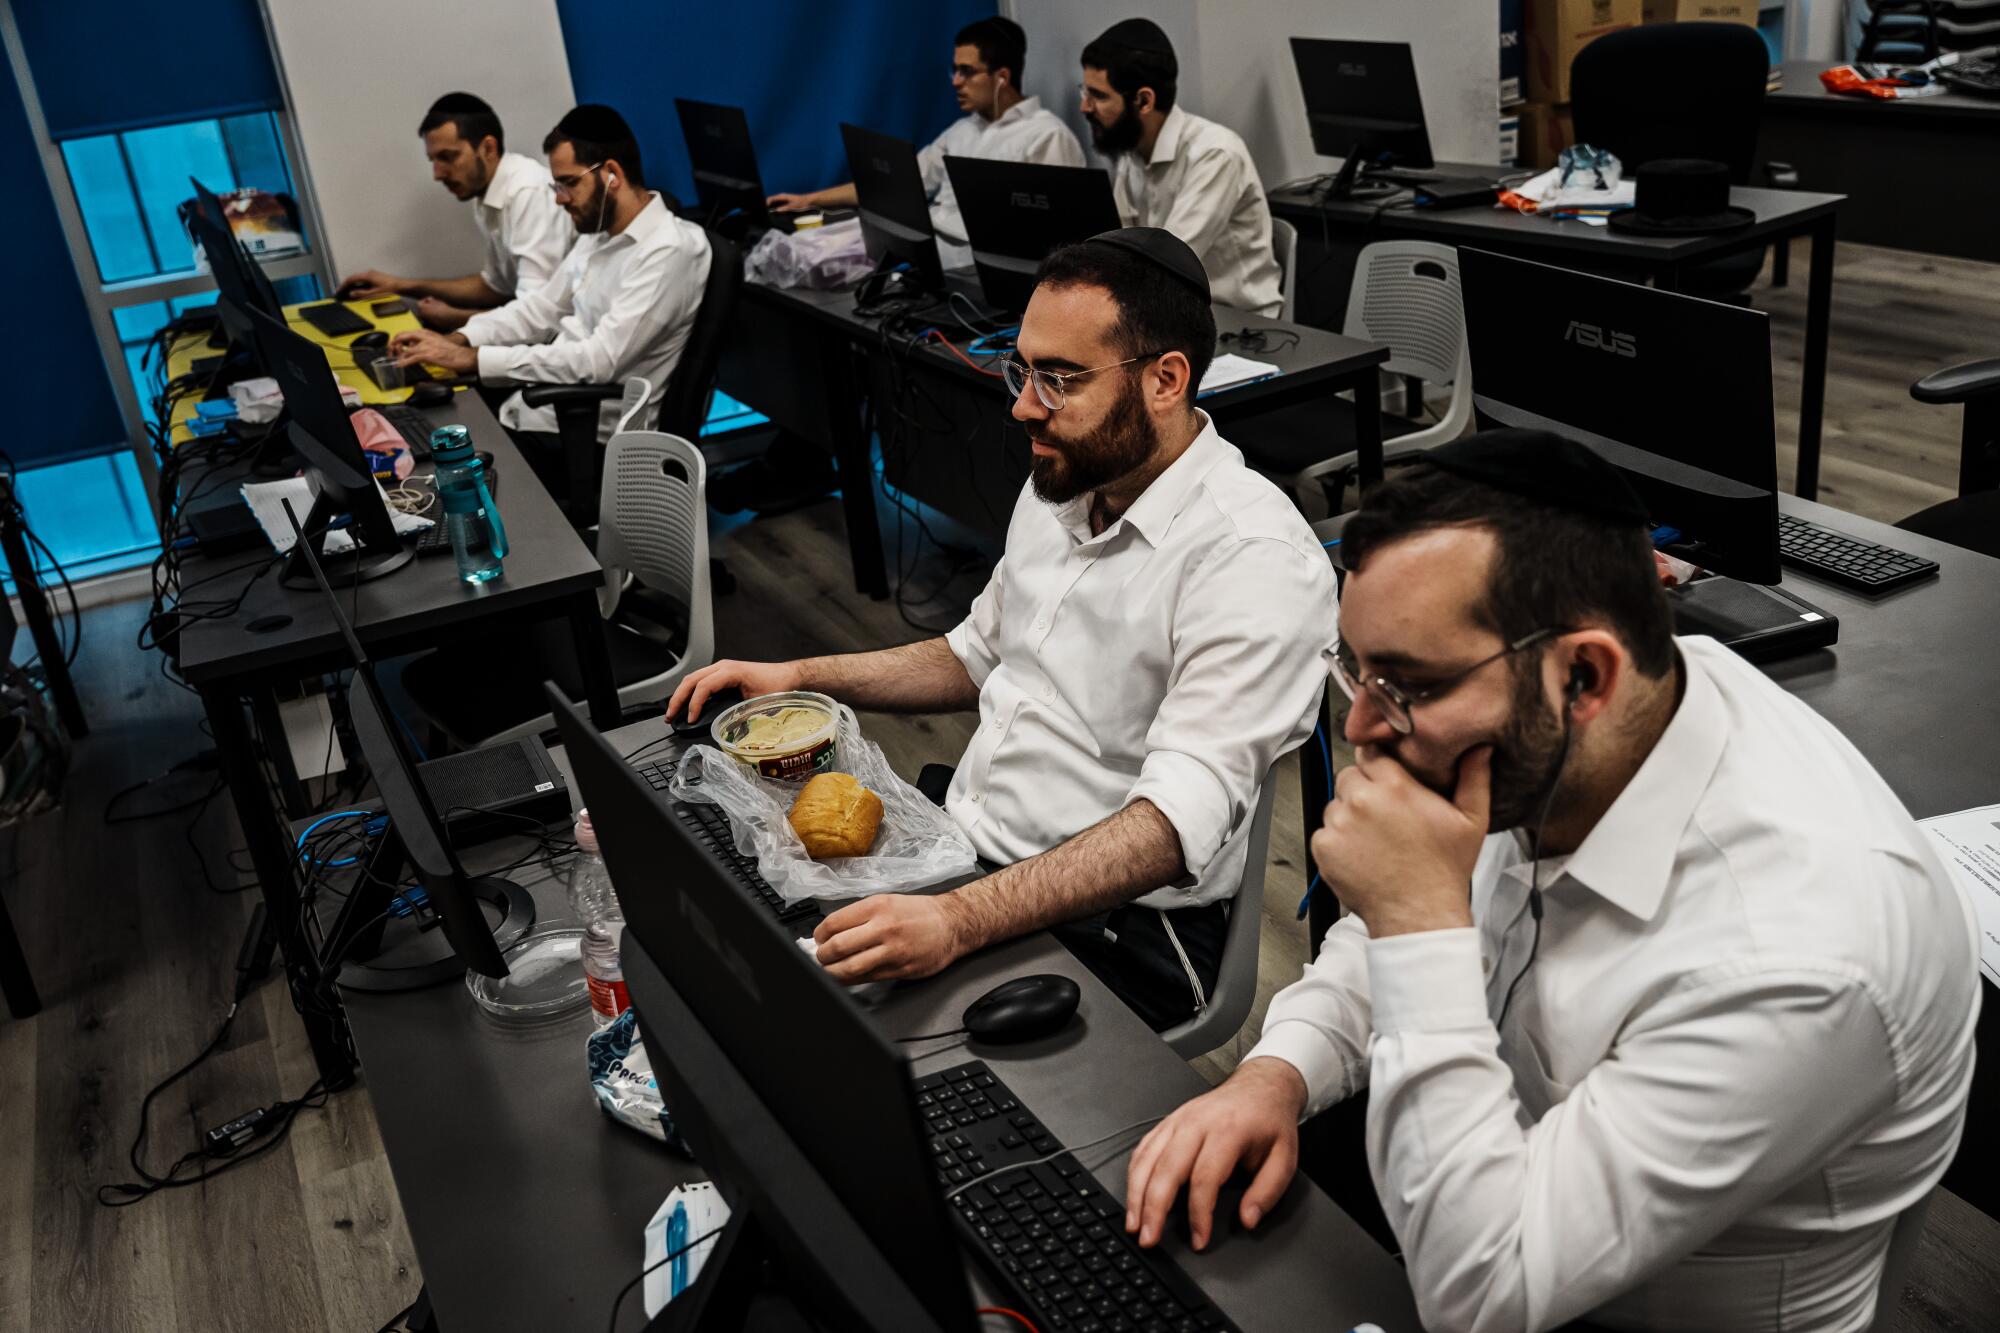 Adult students from Orthodox Jewish communities learn to code and program at JBH.